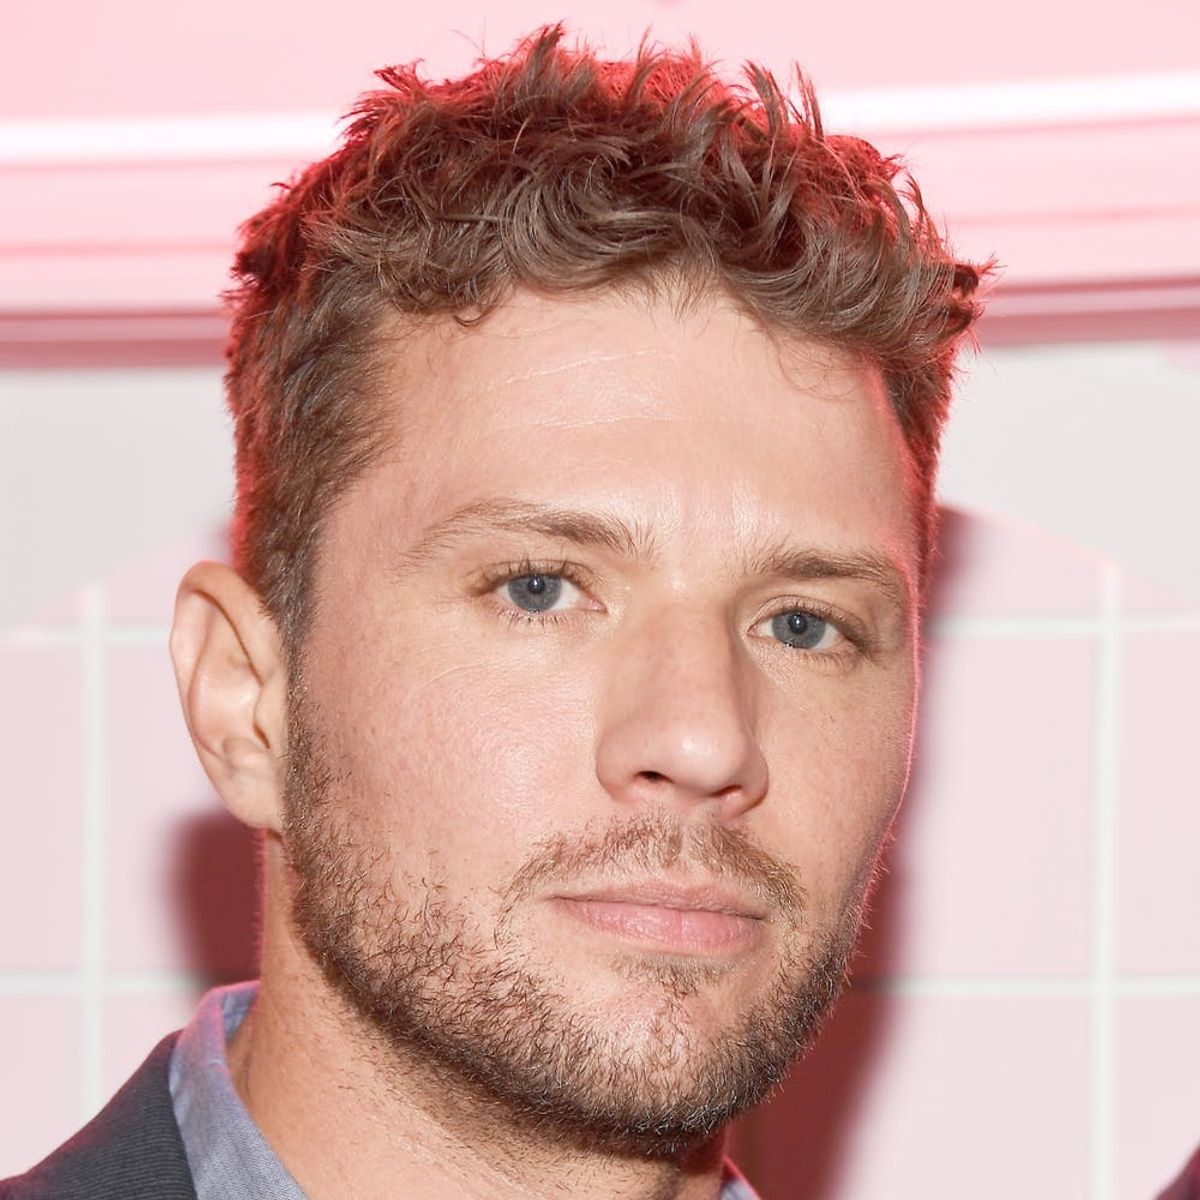 Ryan Phillippe Shared a Hospital Selfie on Instagram After Injuring His Leg